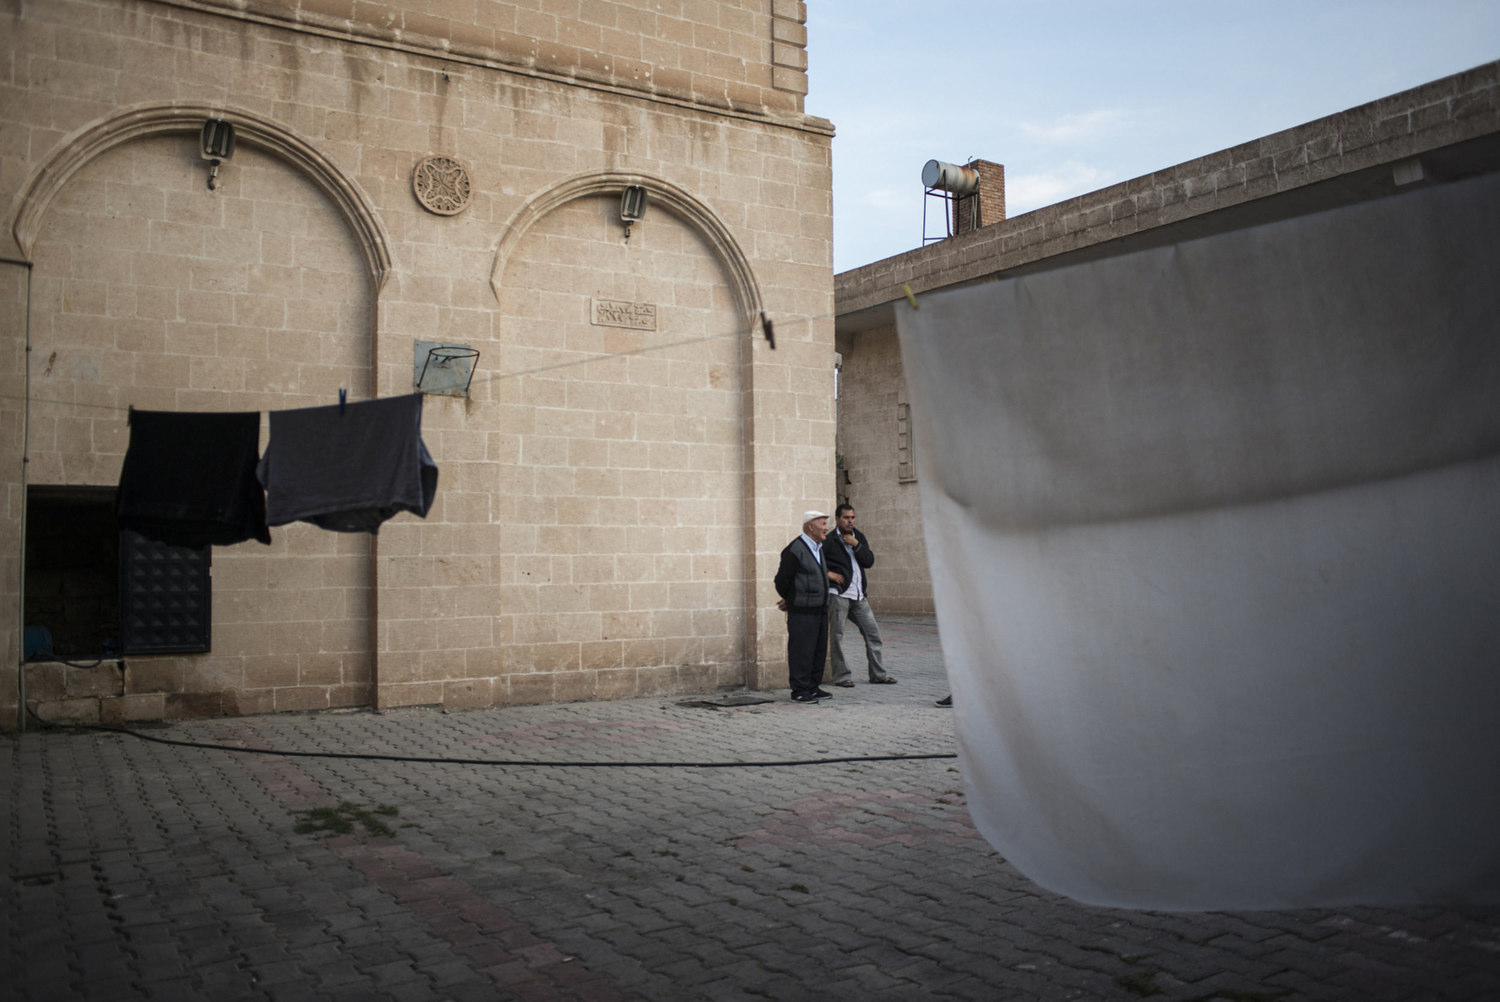  In the courtyard of the cultural center, Syrian refugees talk while laundry is drying on October 30th, 2014 in Midyat, Turkey. 